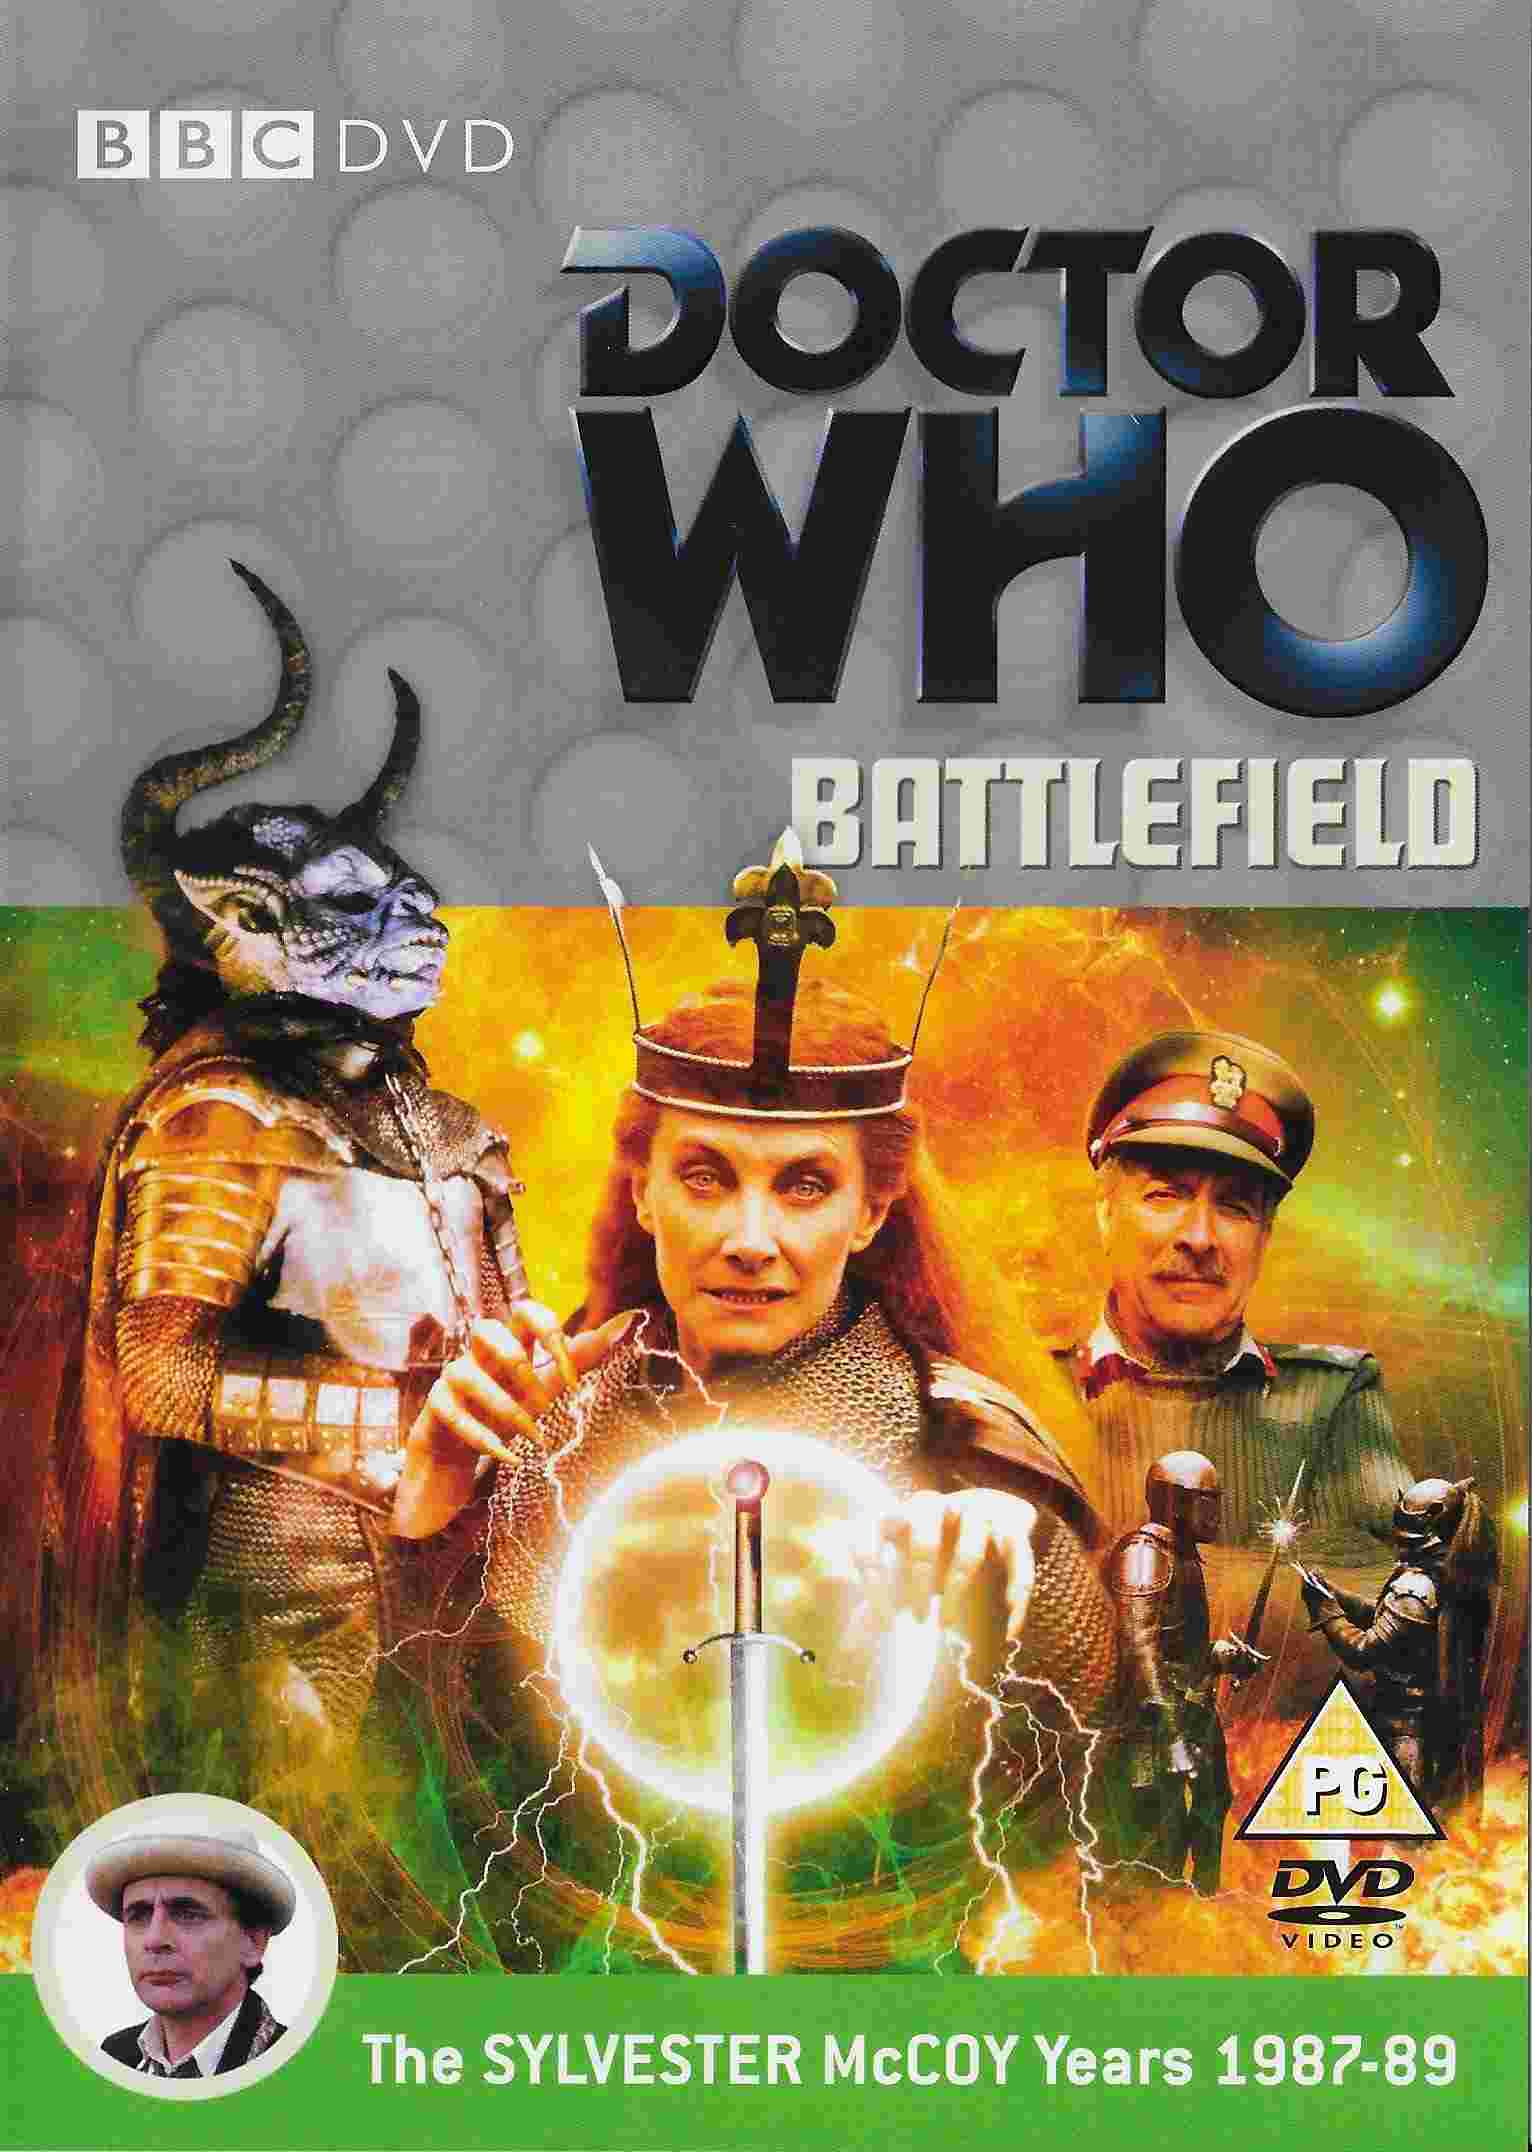 Front cover of BBCDVD 2440